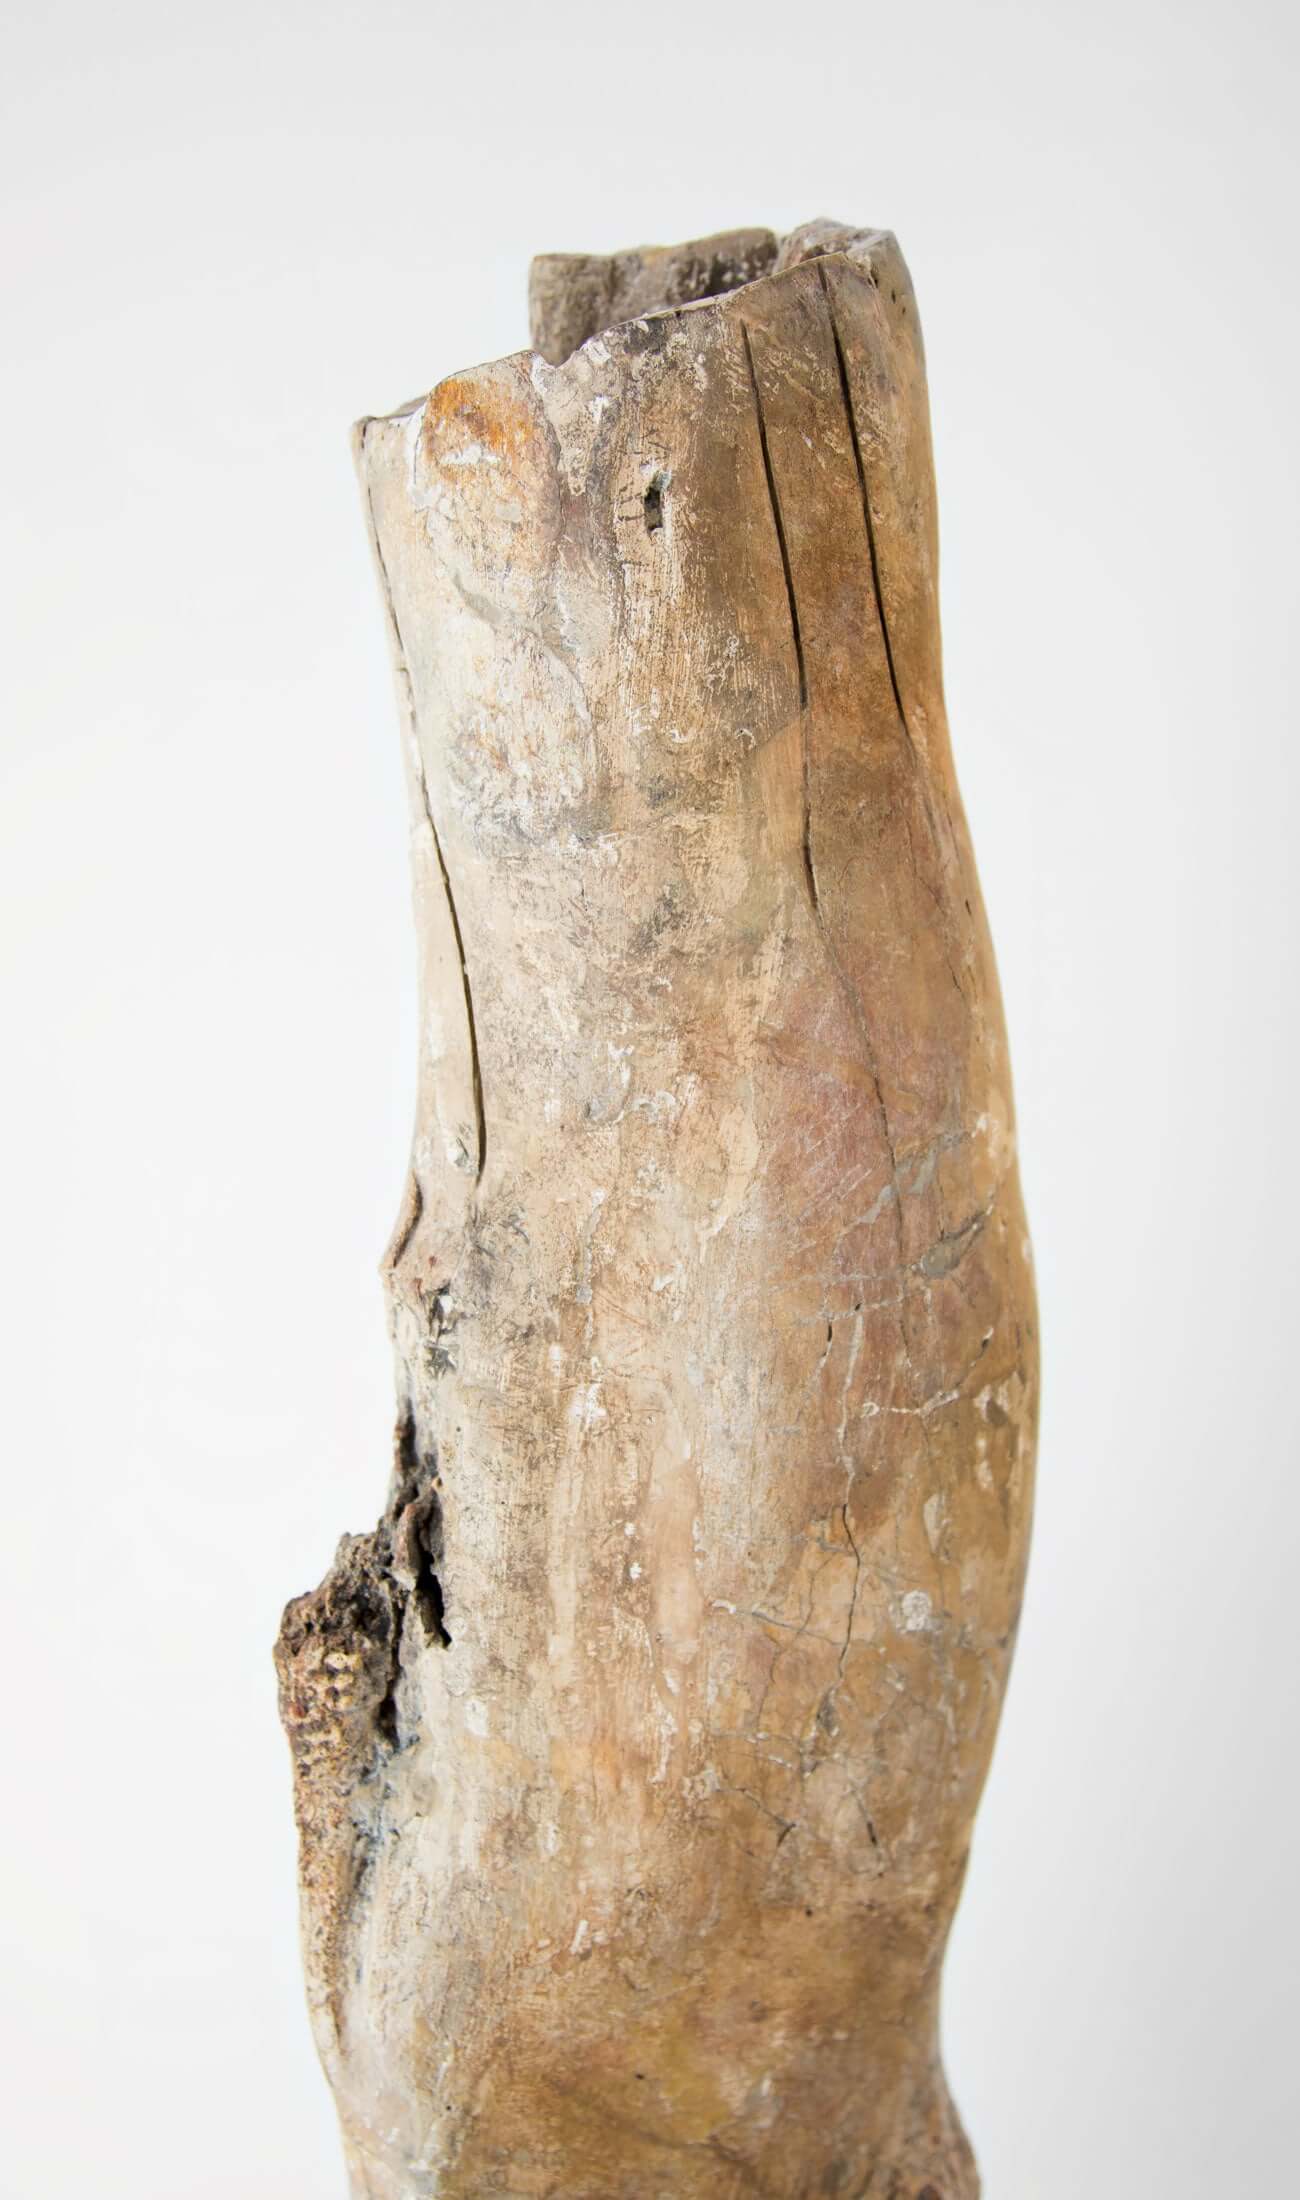 Scientifically important theropod dinosaur fossil femur bone for sale measuring 685mm at THE FOSSIL STORE